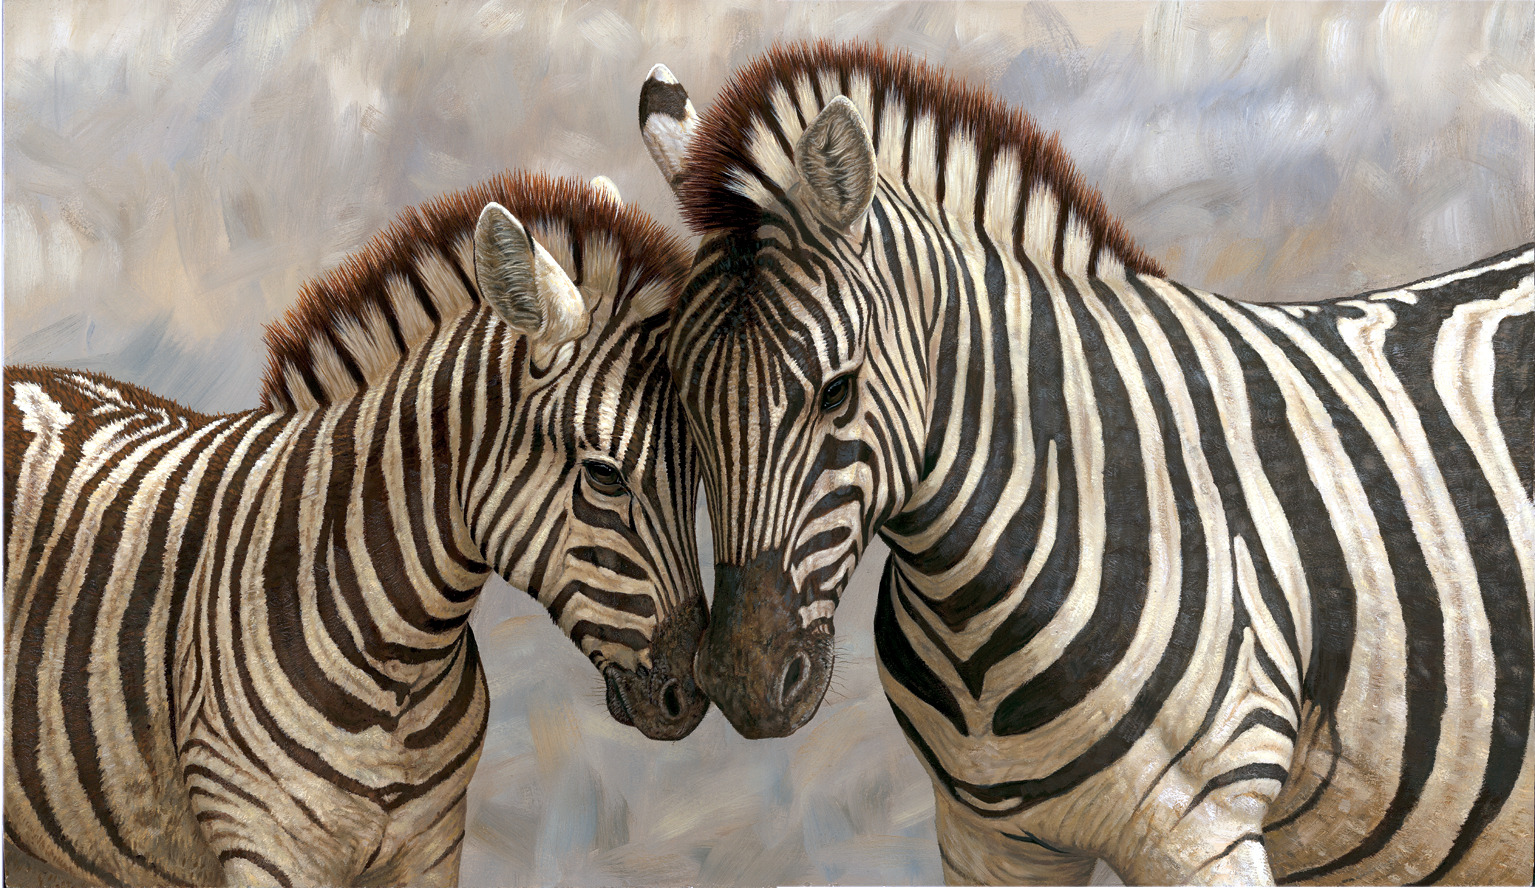 Painting of two zebras by Robert E. Fuller